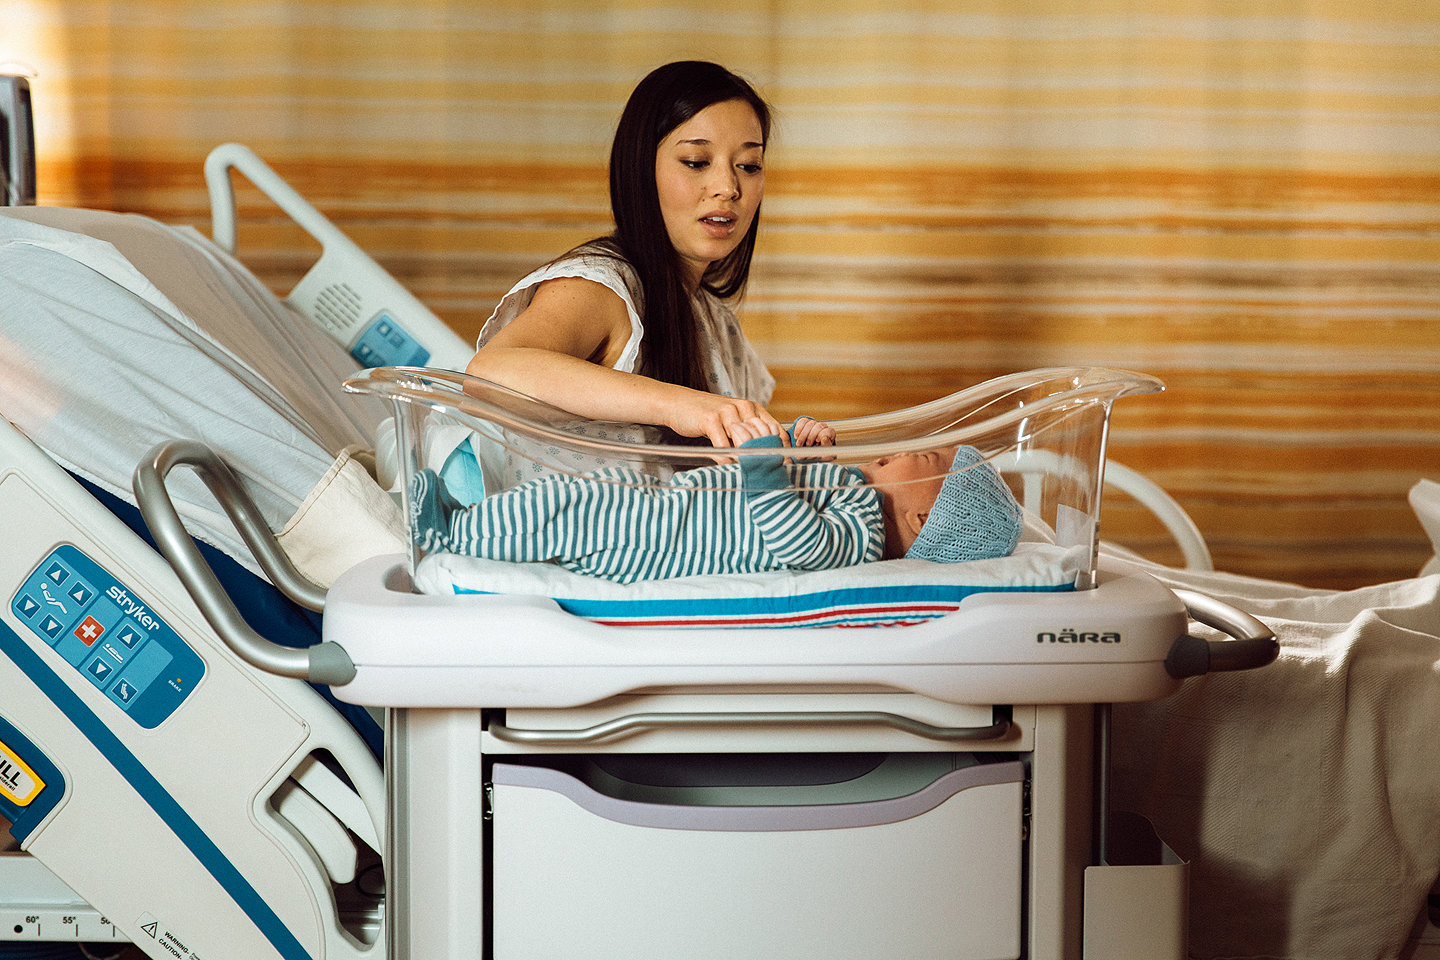 The Nara hospital bassient has a simple, safe design to bring mothers close to their newborns